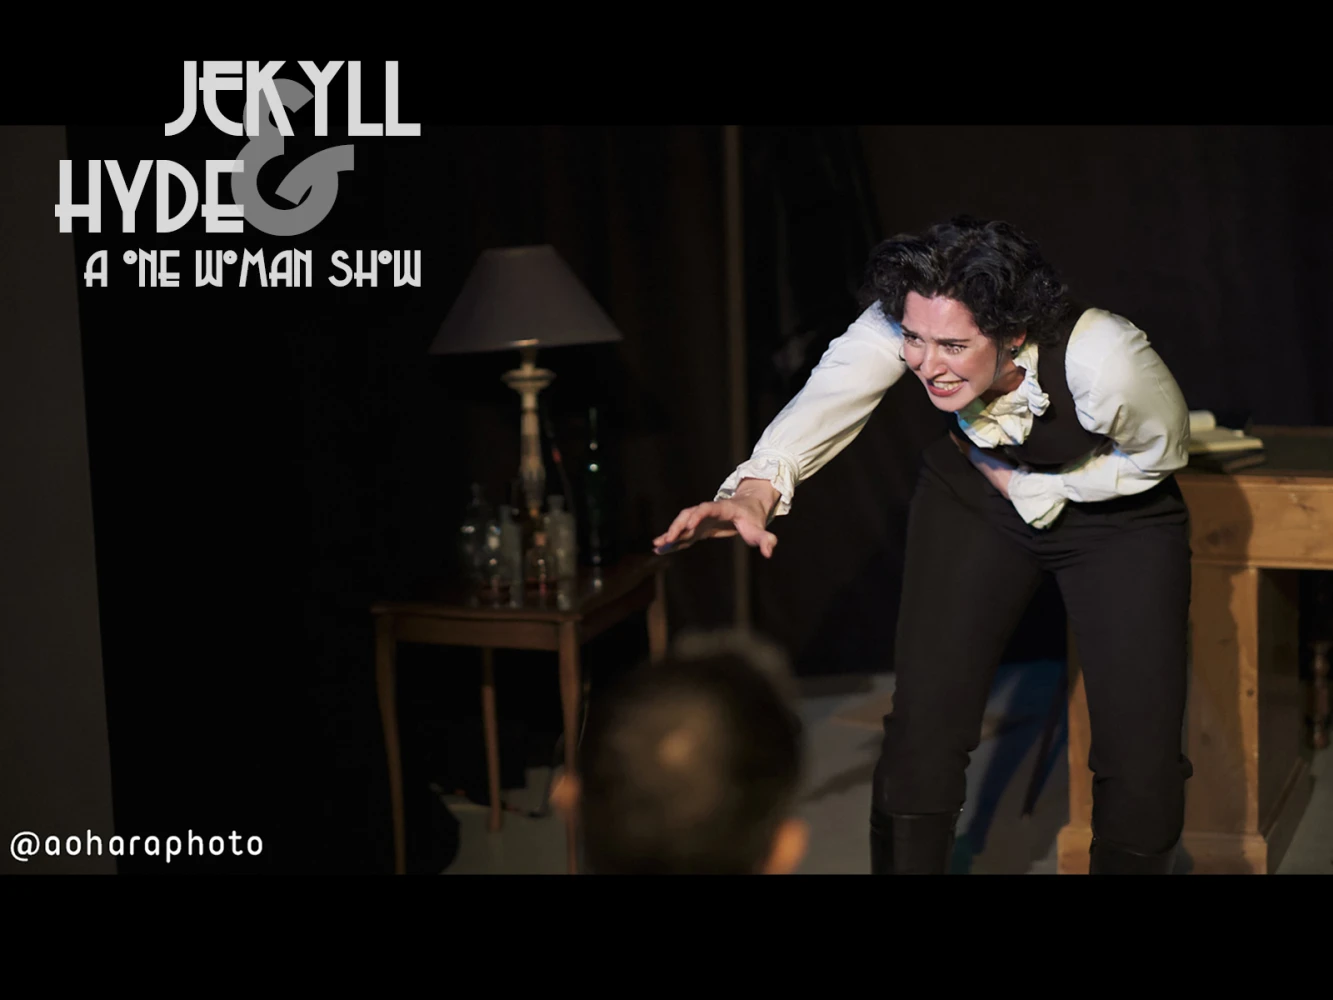 Jekyll & Hyde: What to expect - 2